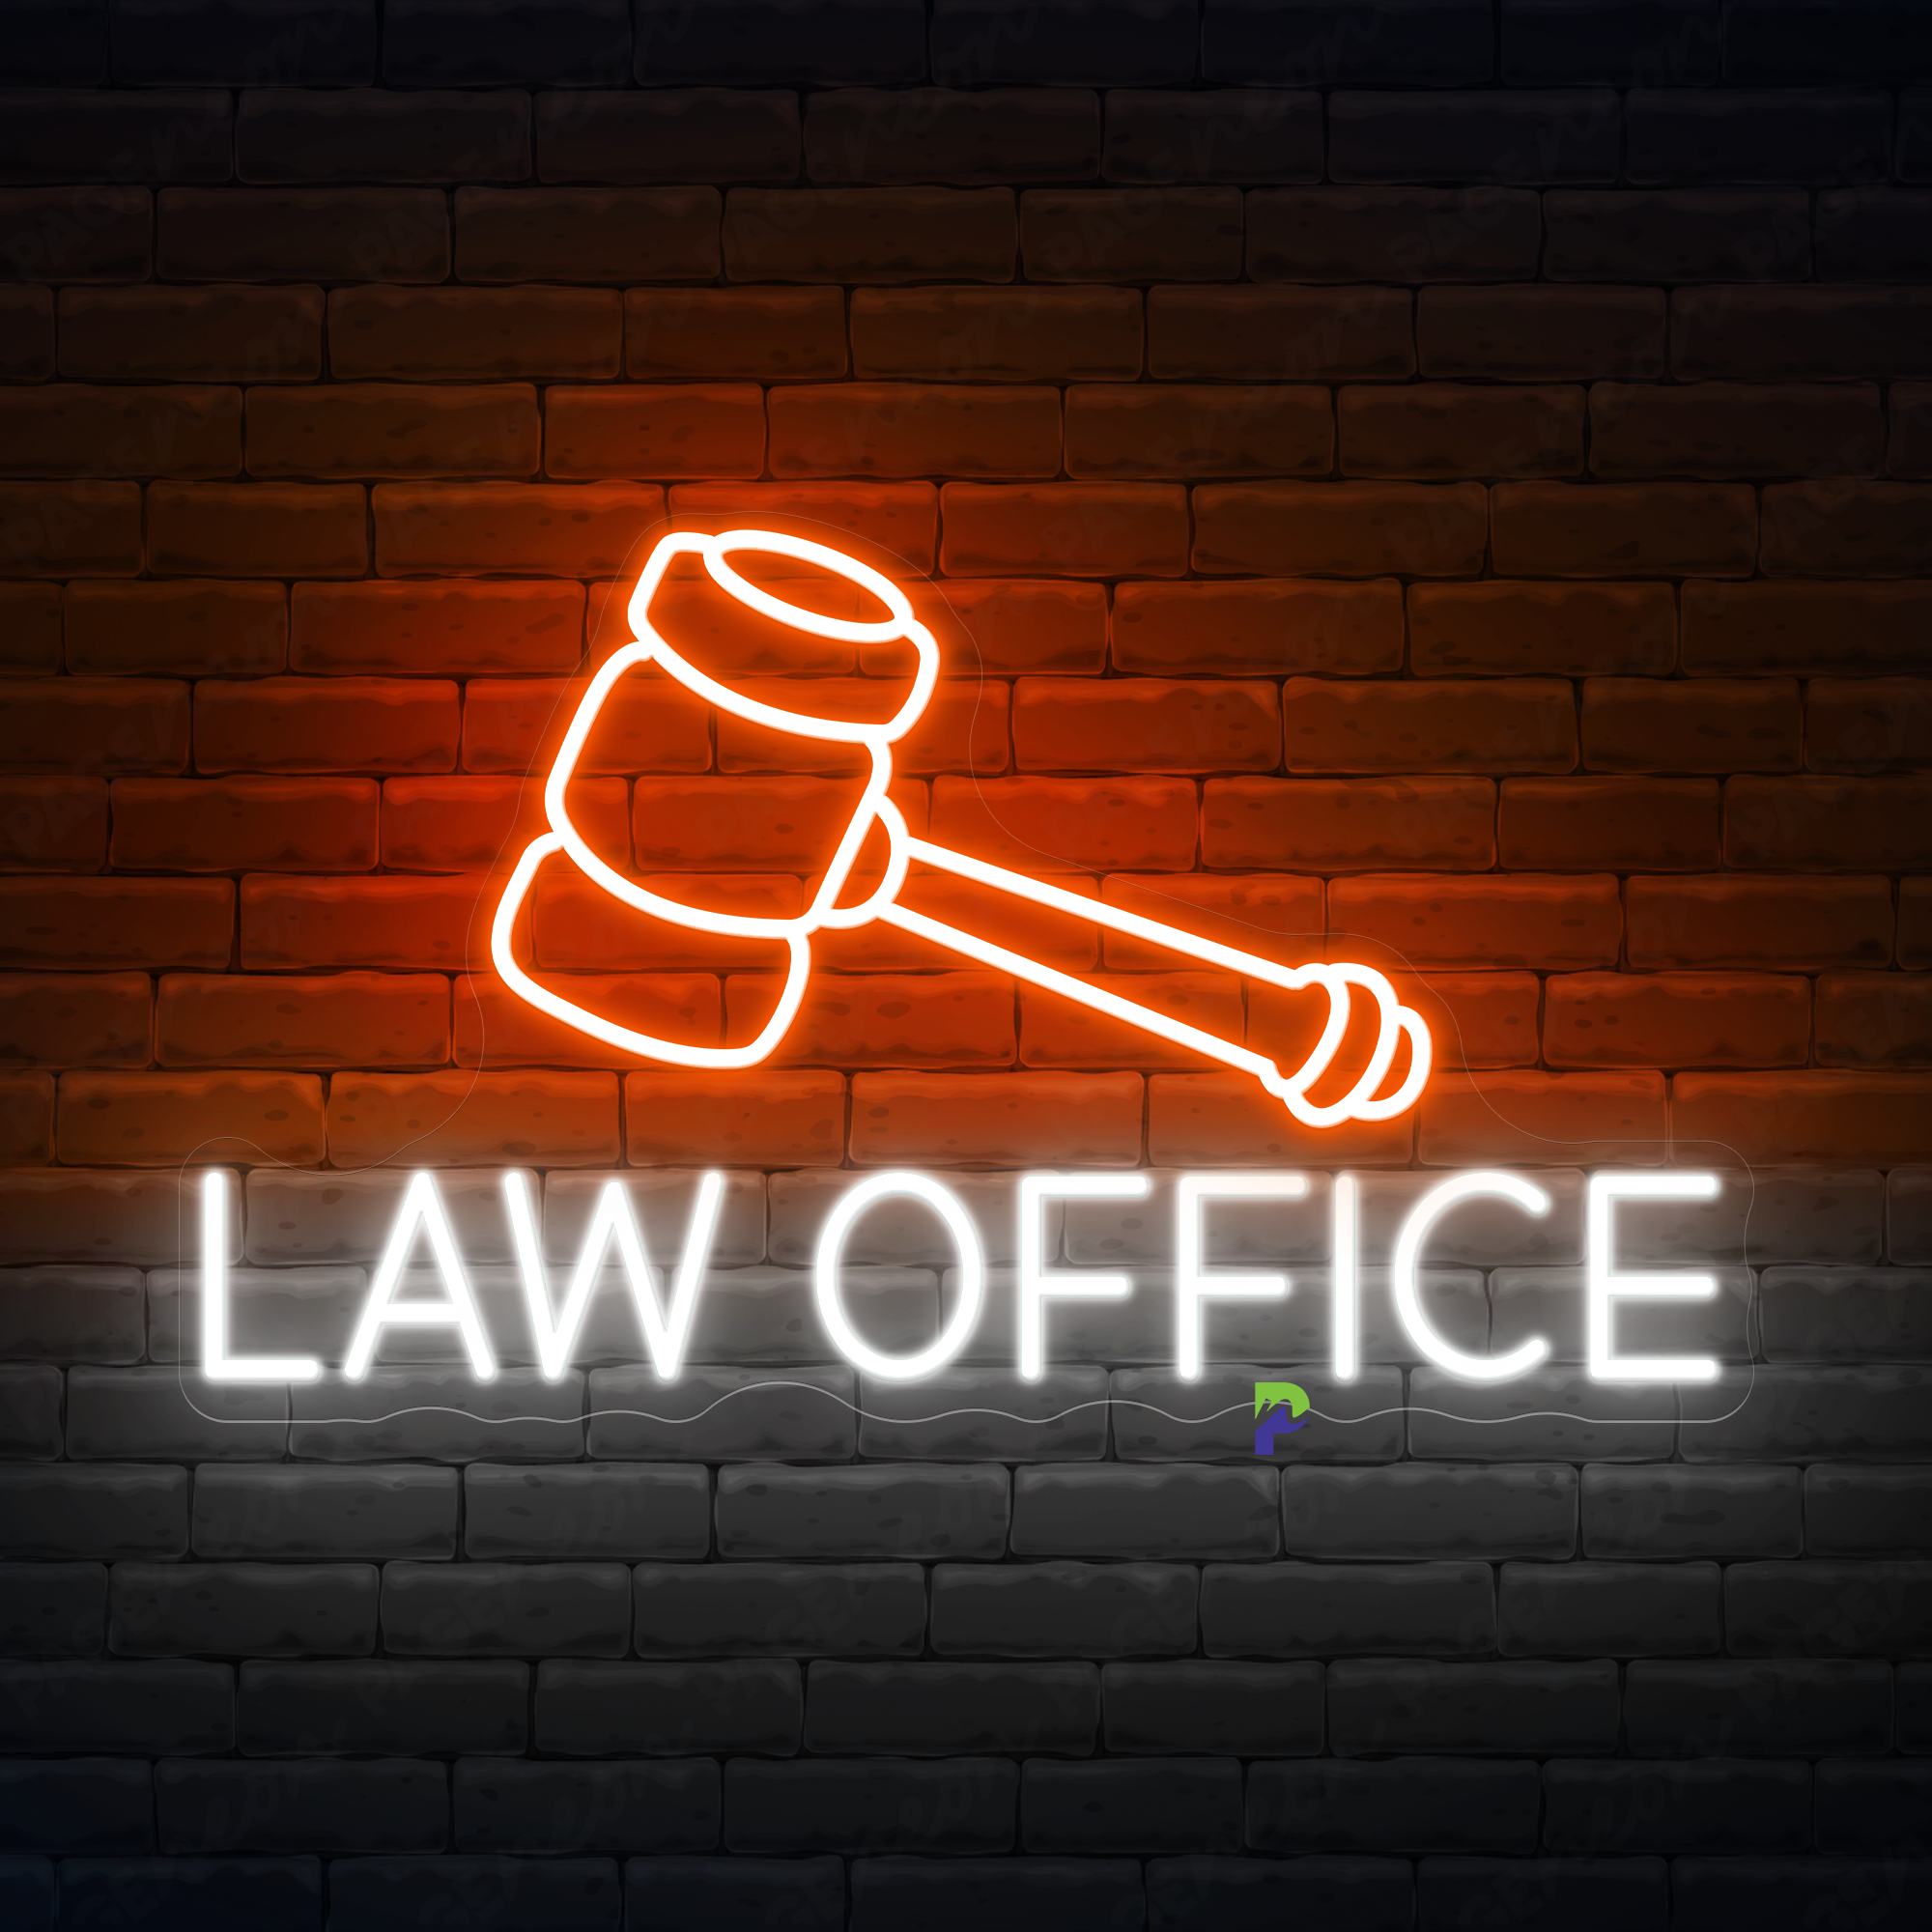 Law Office Neon Sign Legal Business Led Light